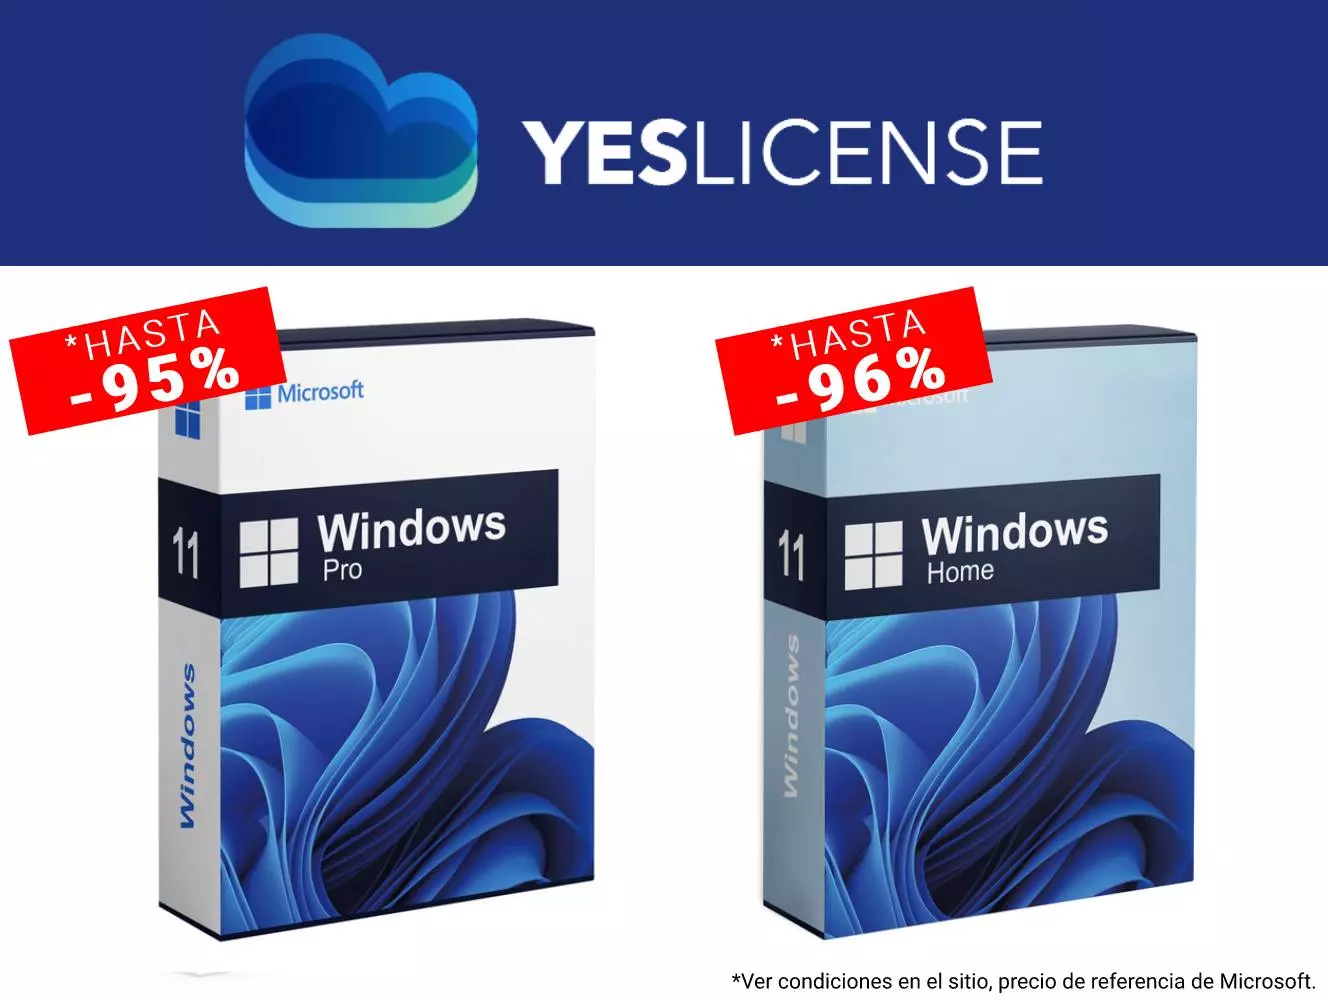 Offer to buy Windows 11 license